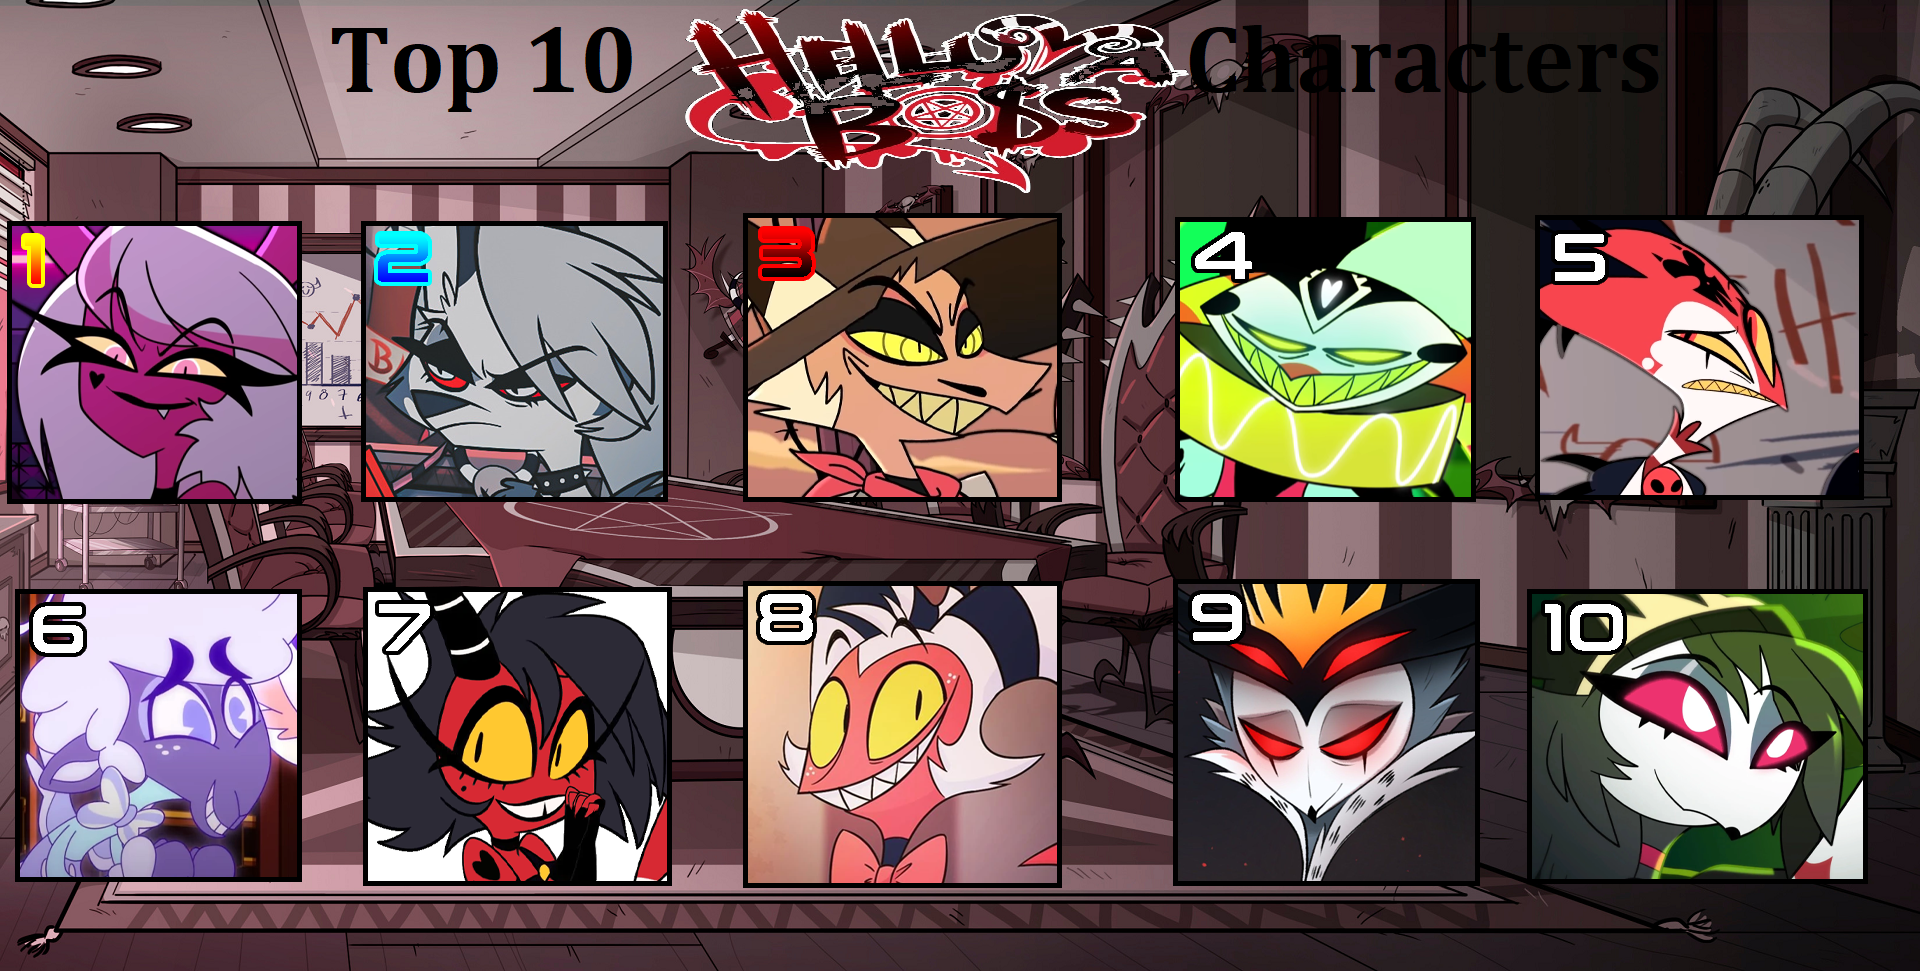 My Top 10 Boss Characters by BleuCentenaire on